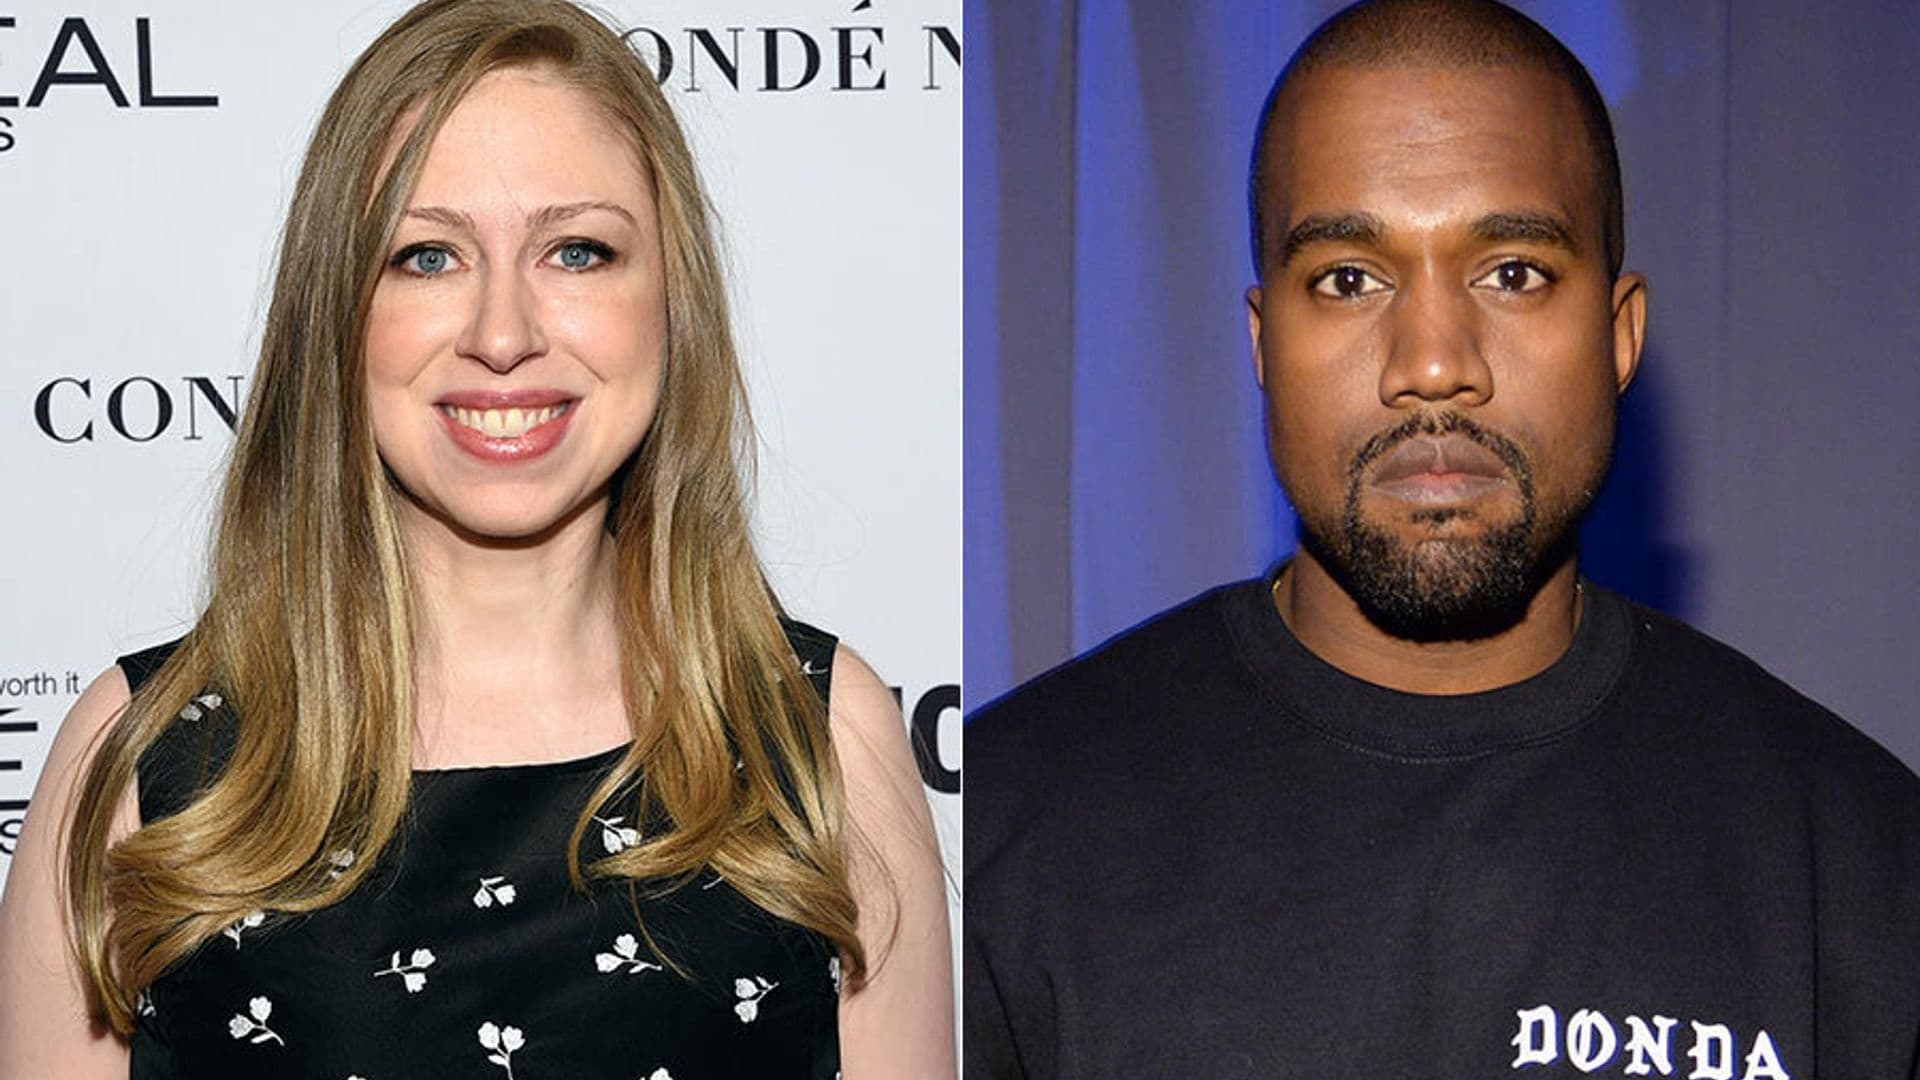 Chelsea Clinton reacts to Kanye West's 2020 presidential run